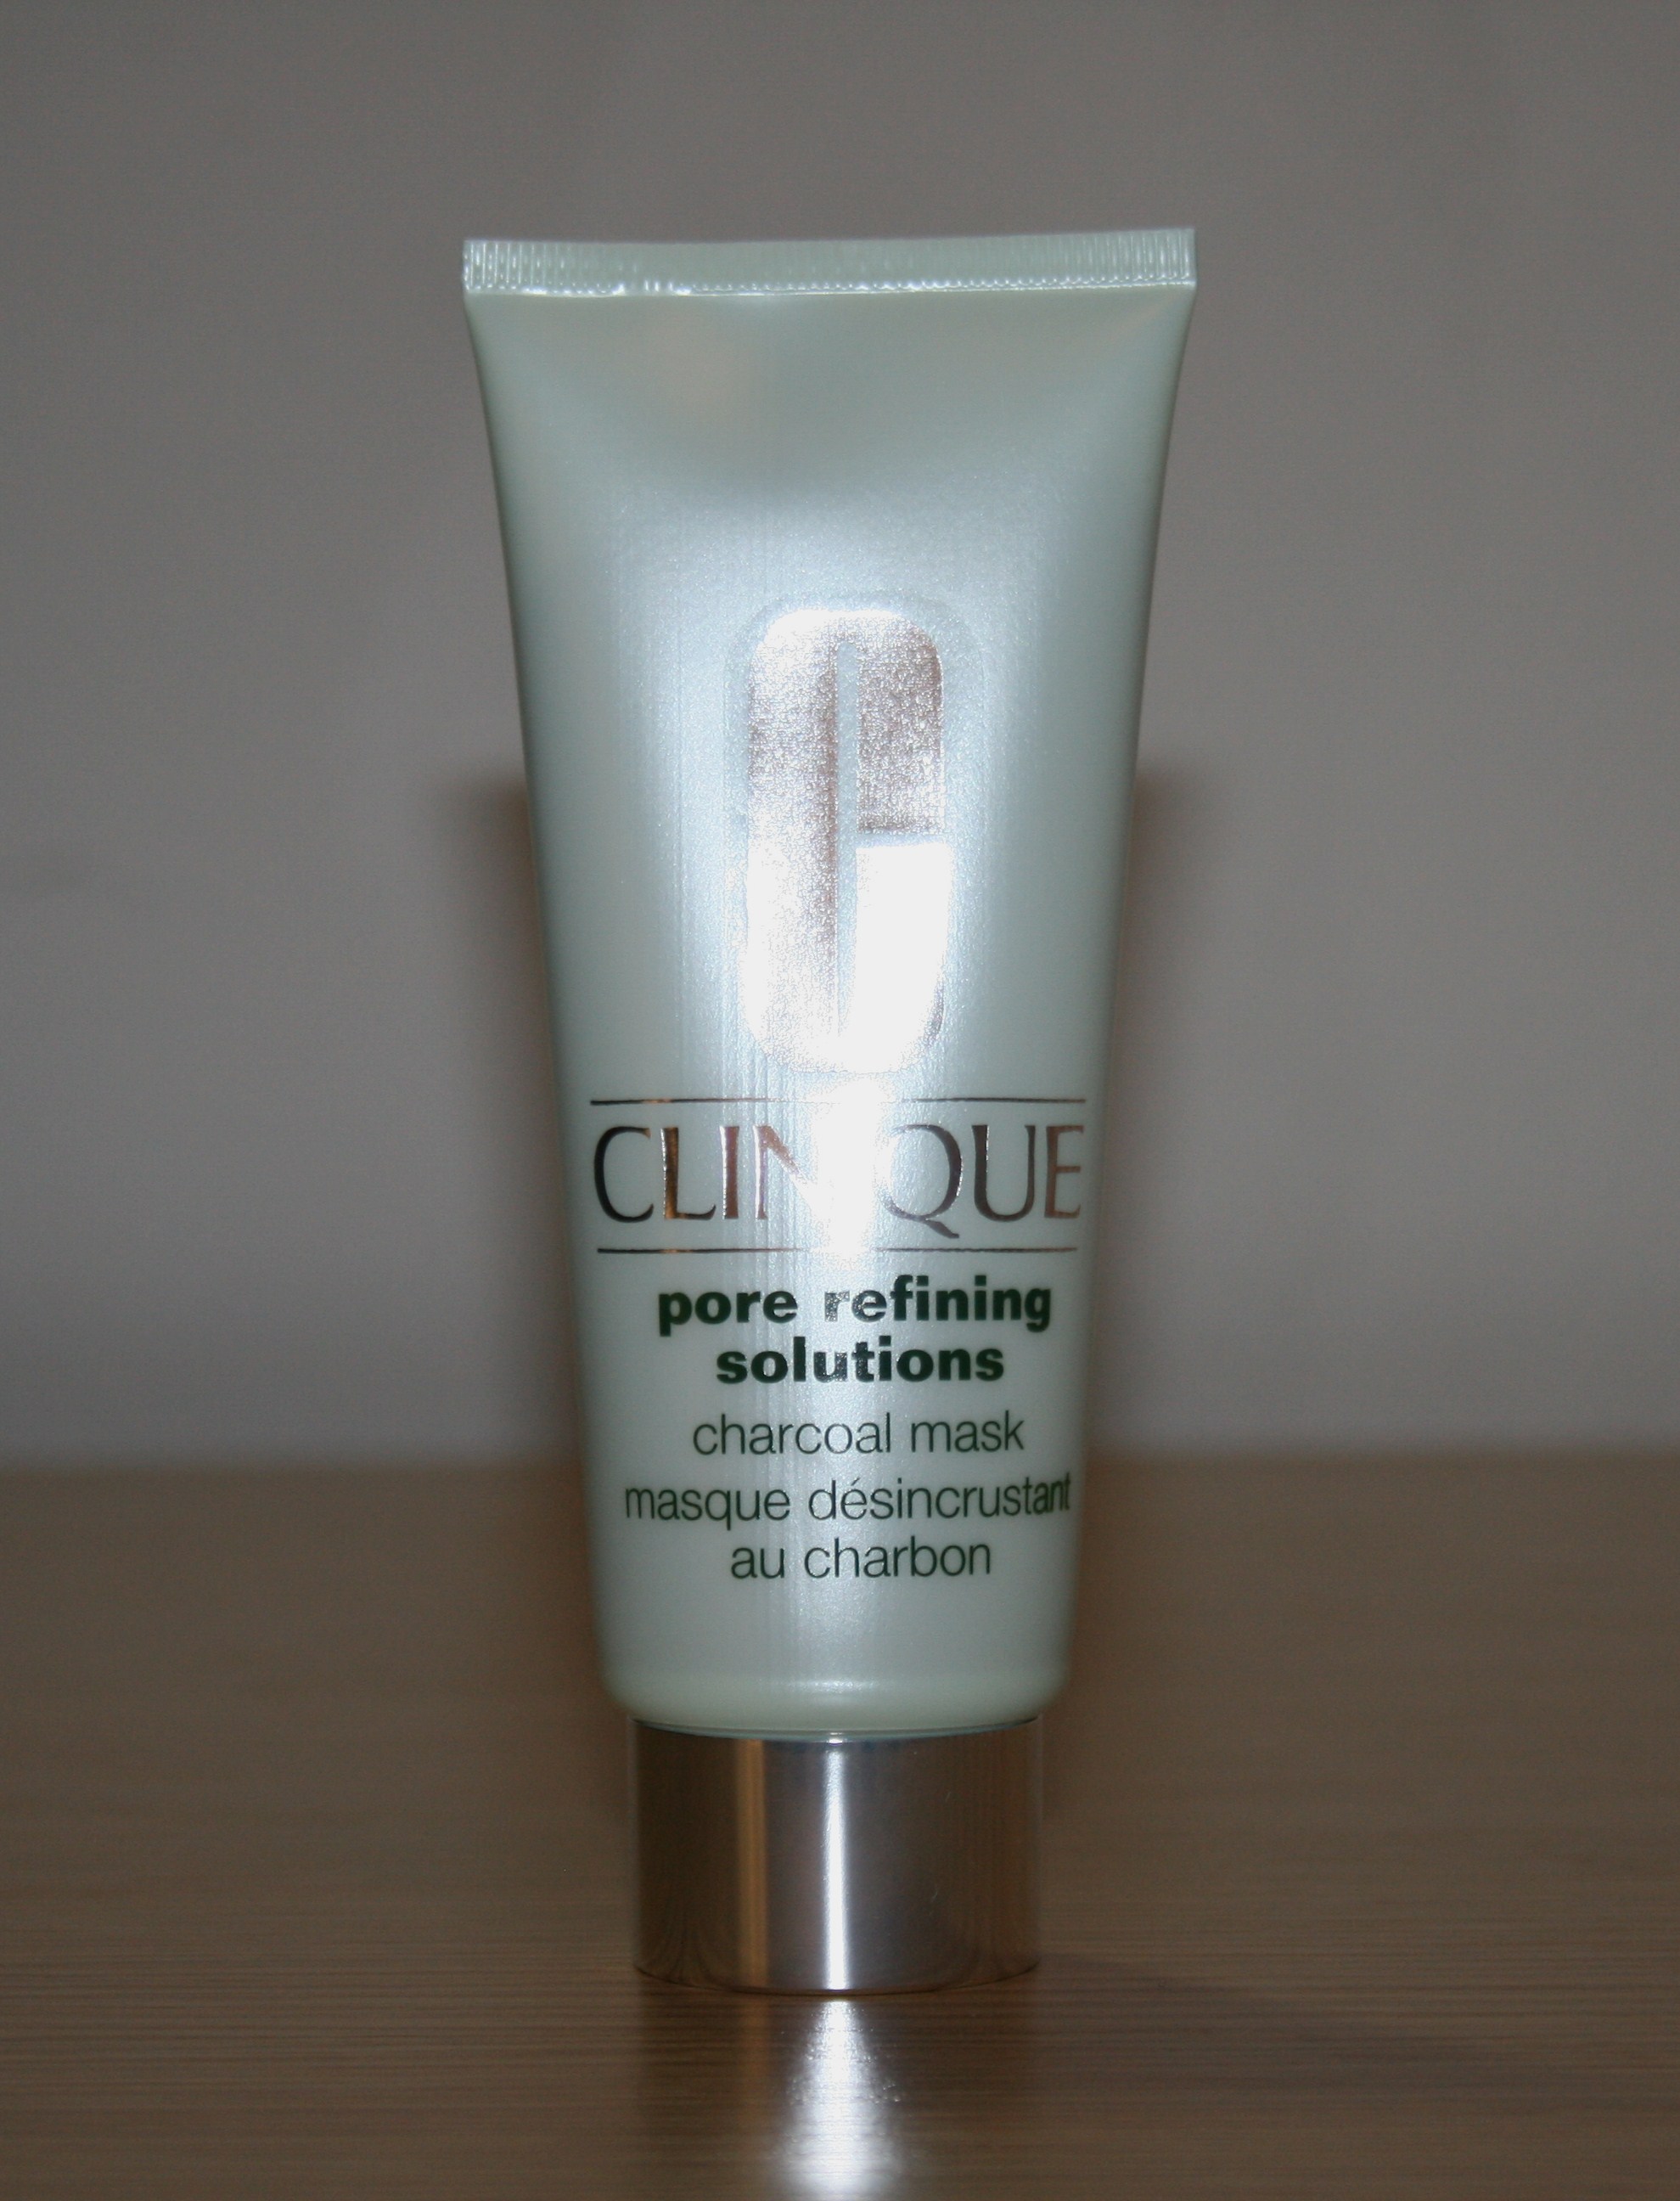 Henfald Notesbog Reorganisere Mask Monday: Clinique Pore Refining Solutions Charcoal Mask - Beauty Geek